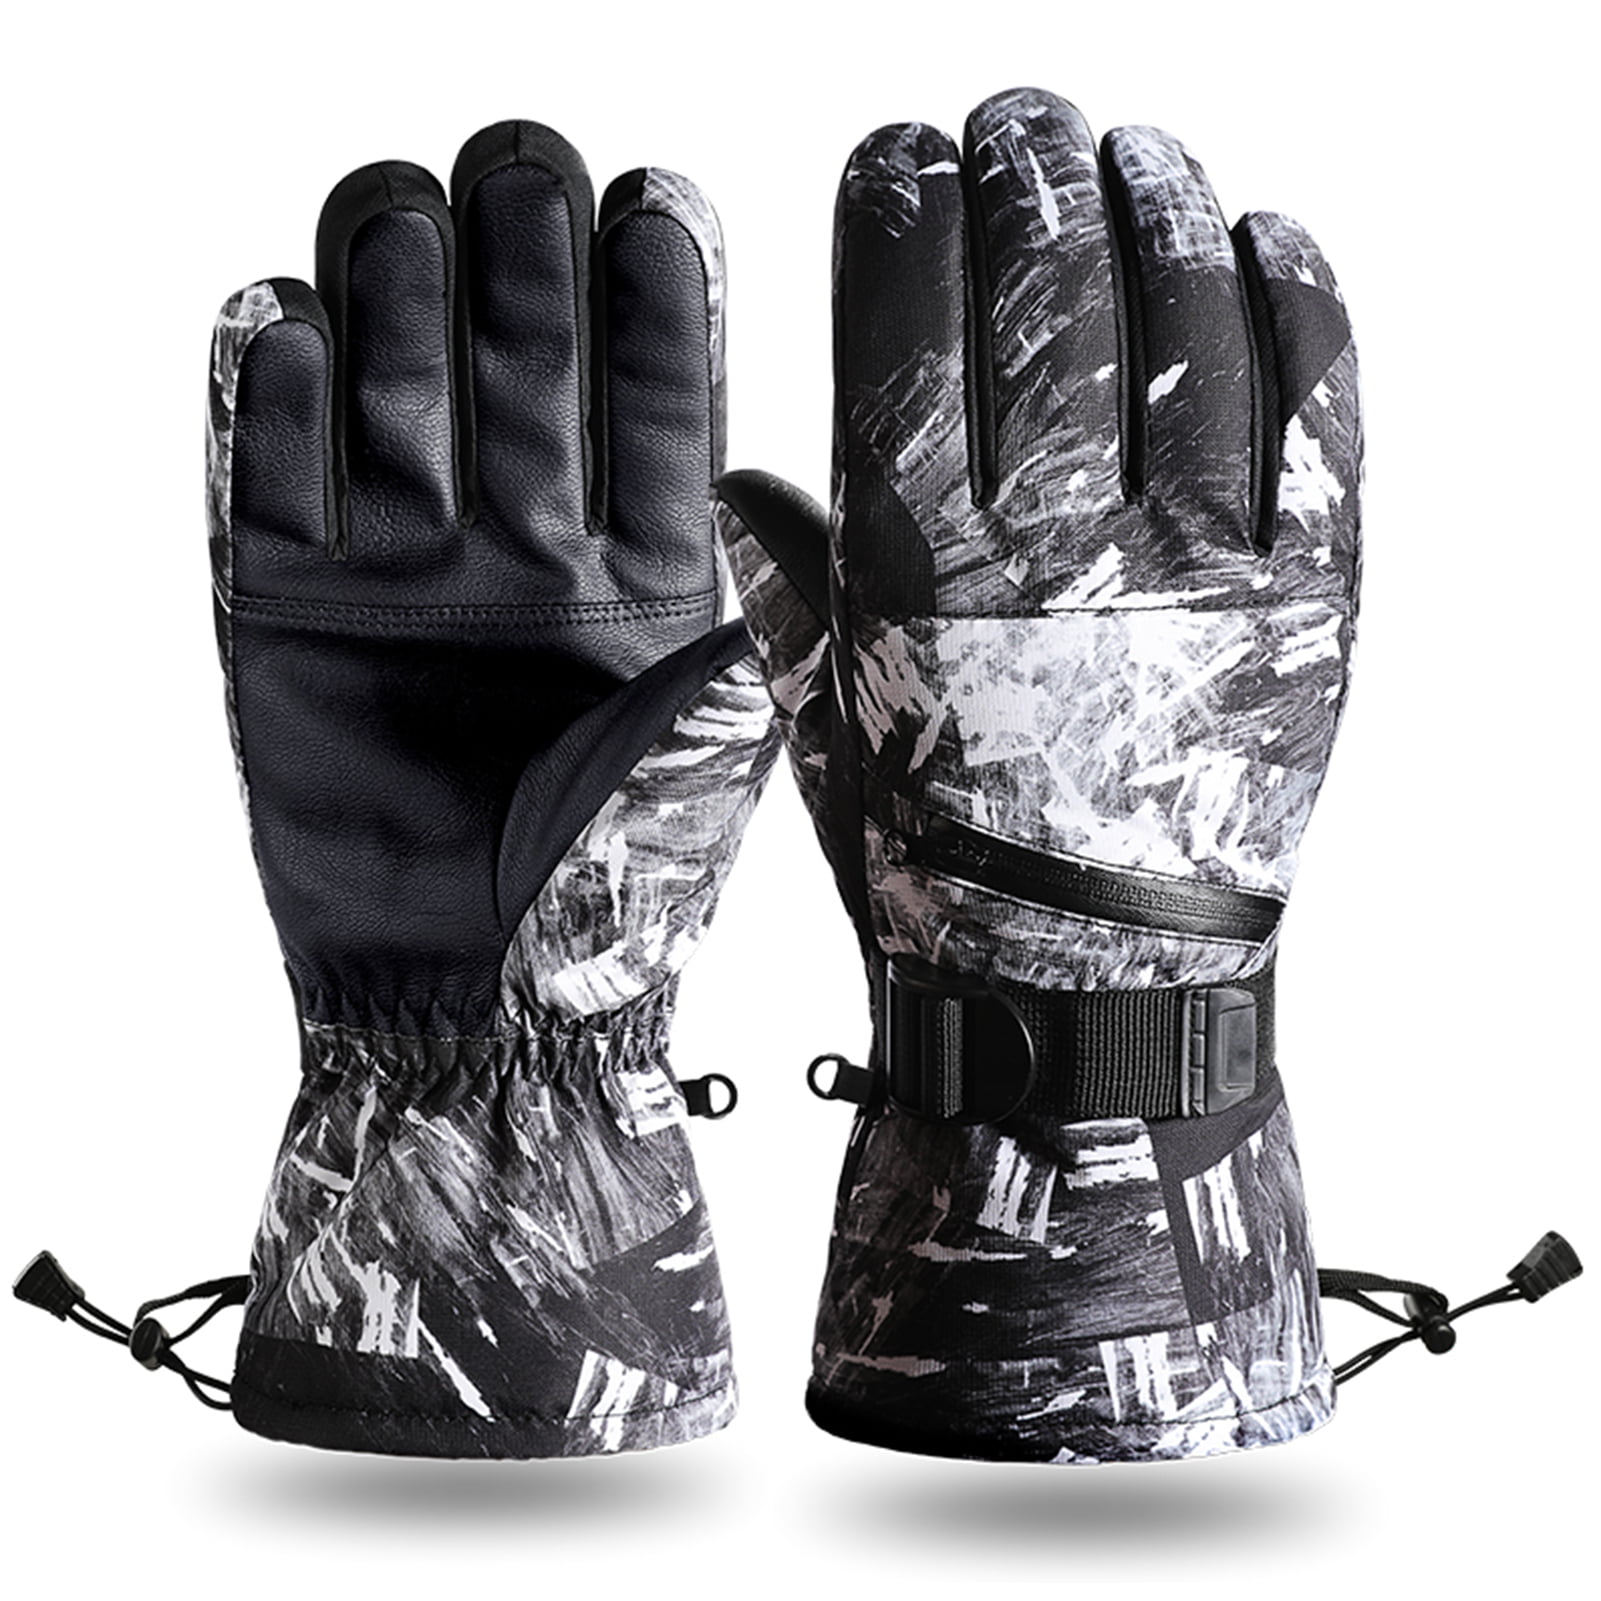 Men's Heat Machine Thick Warm Winter 2.3 Tog Double Insulated Thermal Gloves 